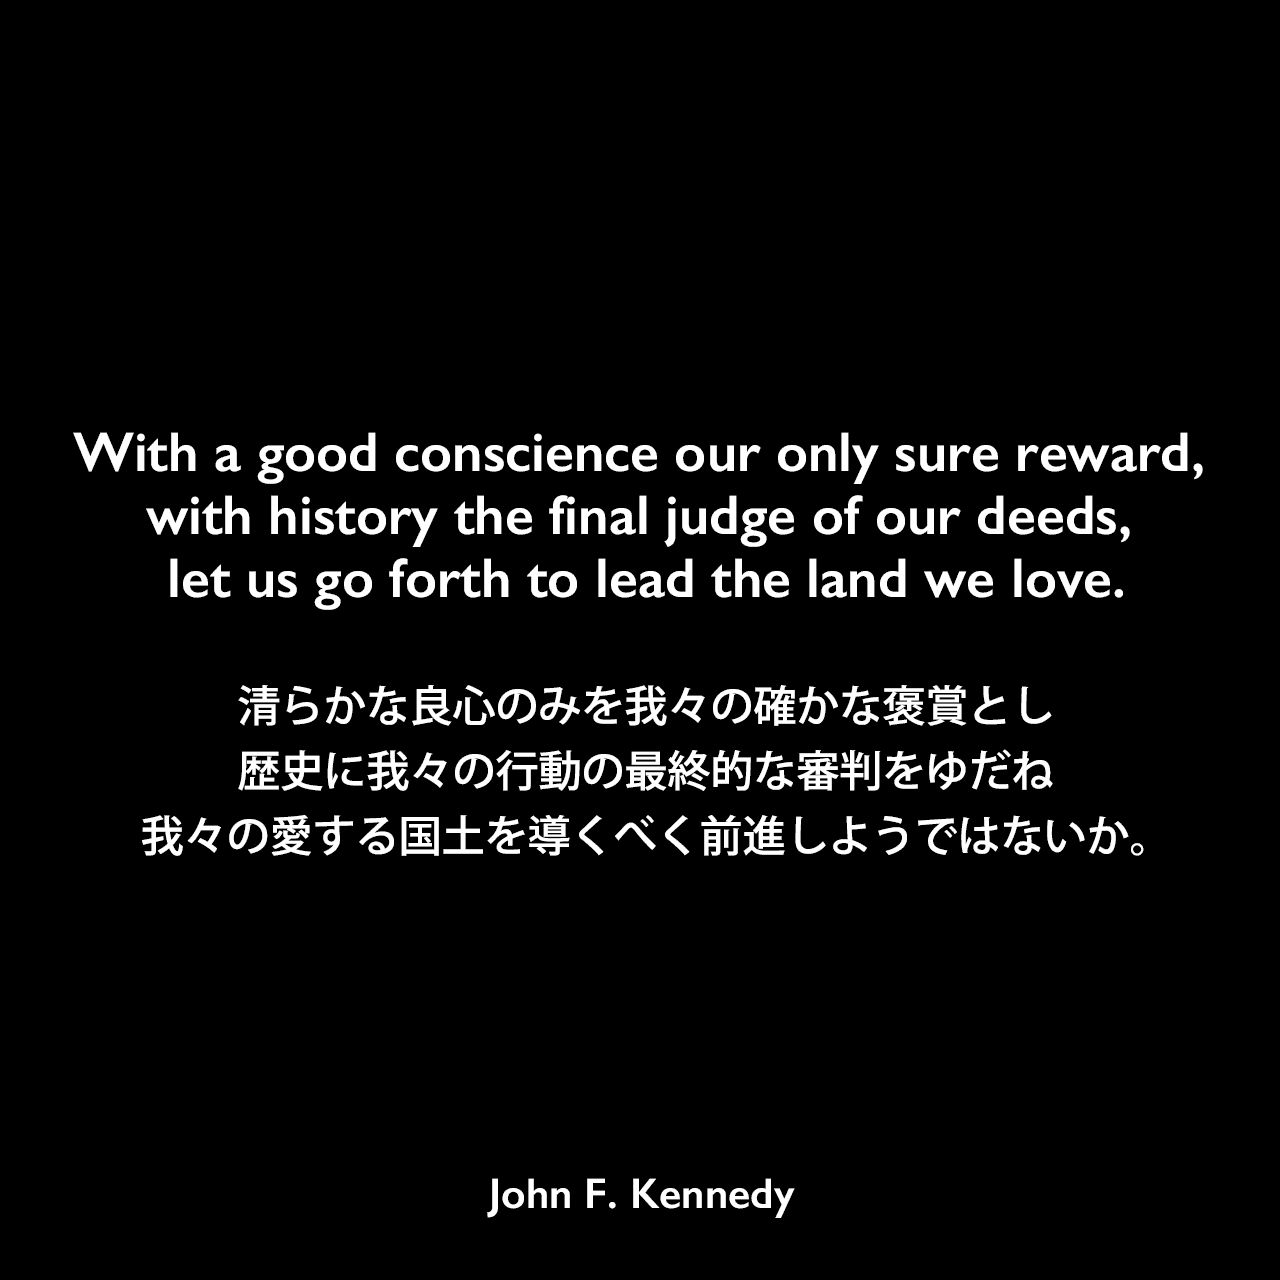 With a good conscience our only sure reward, with history the final judge of our deeds, let us go forth to lead the land we love.清らかな良心のみを我々の確かな褒賞とし、歴史に我々の行動の最終的な審判をゆだね、我々の愛する国土を導くべく前進しようではないか。John F Kennedy